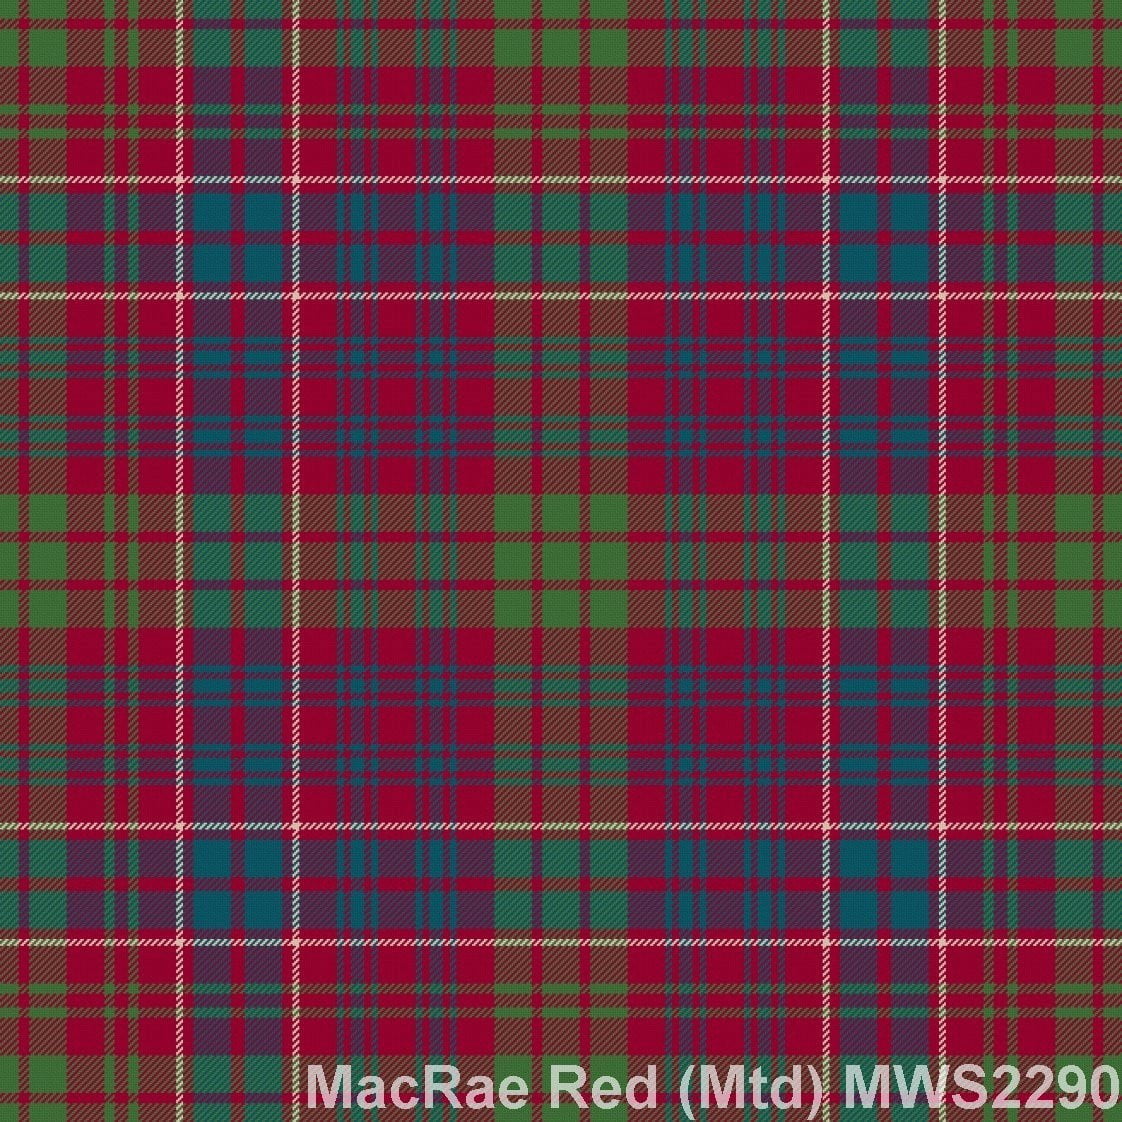 MacRae Red Muted